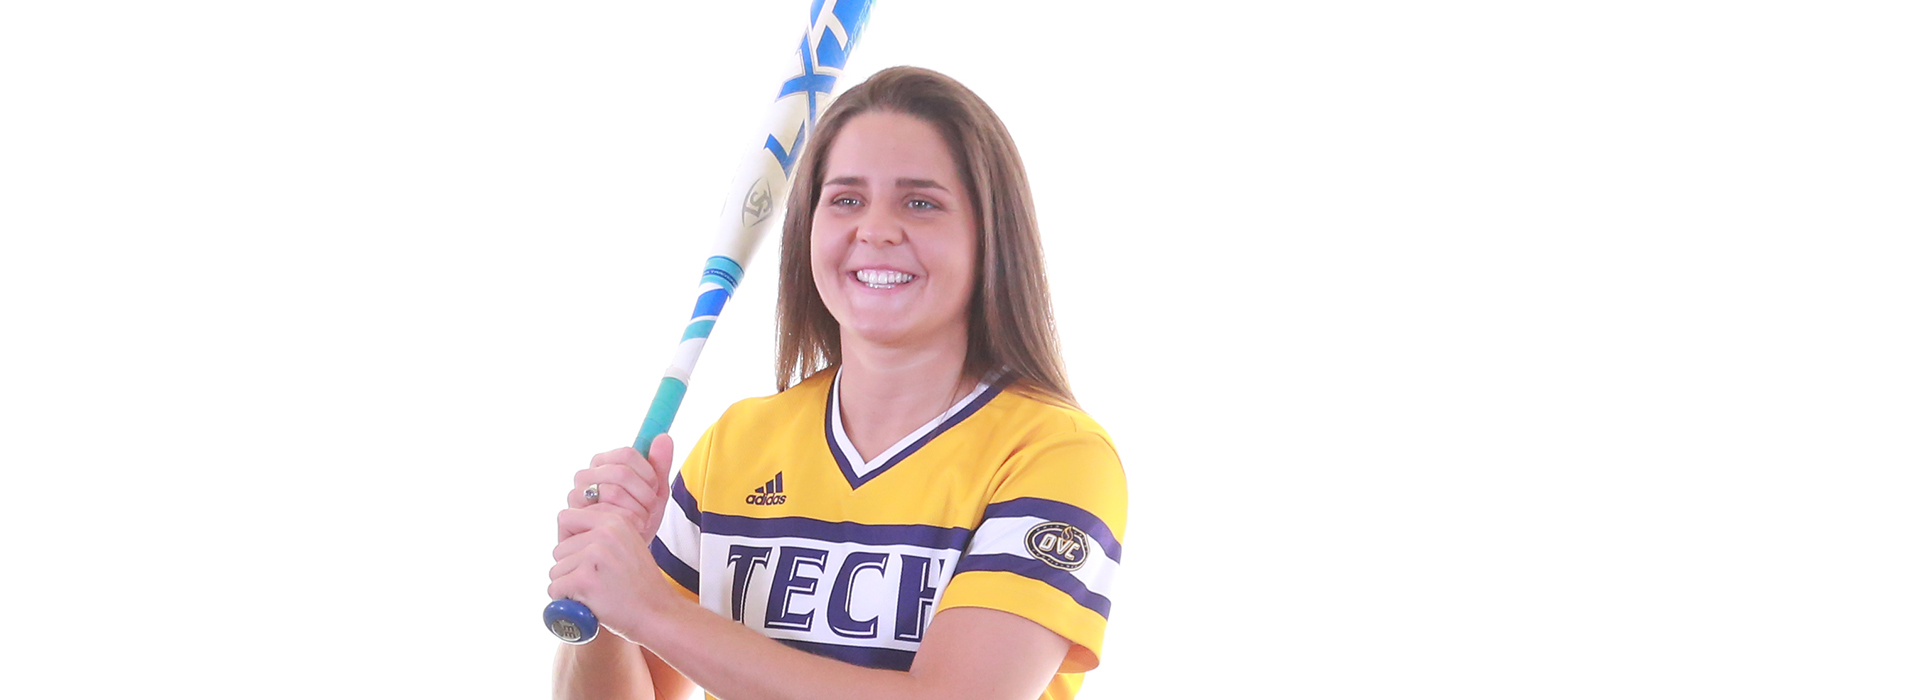 DePolo, Golden Eagles enter OVC play at Tennessee State Friday